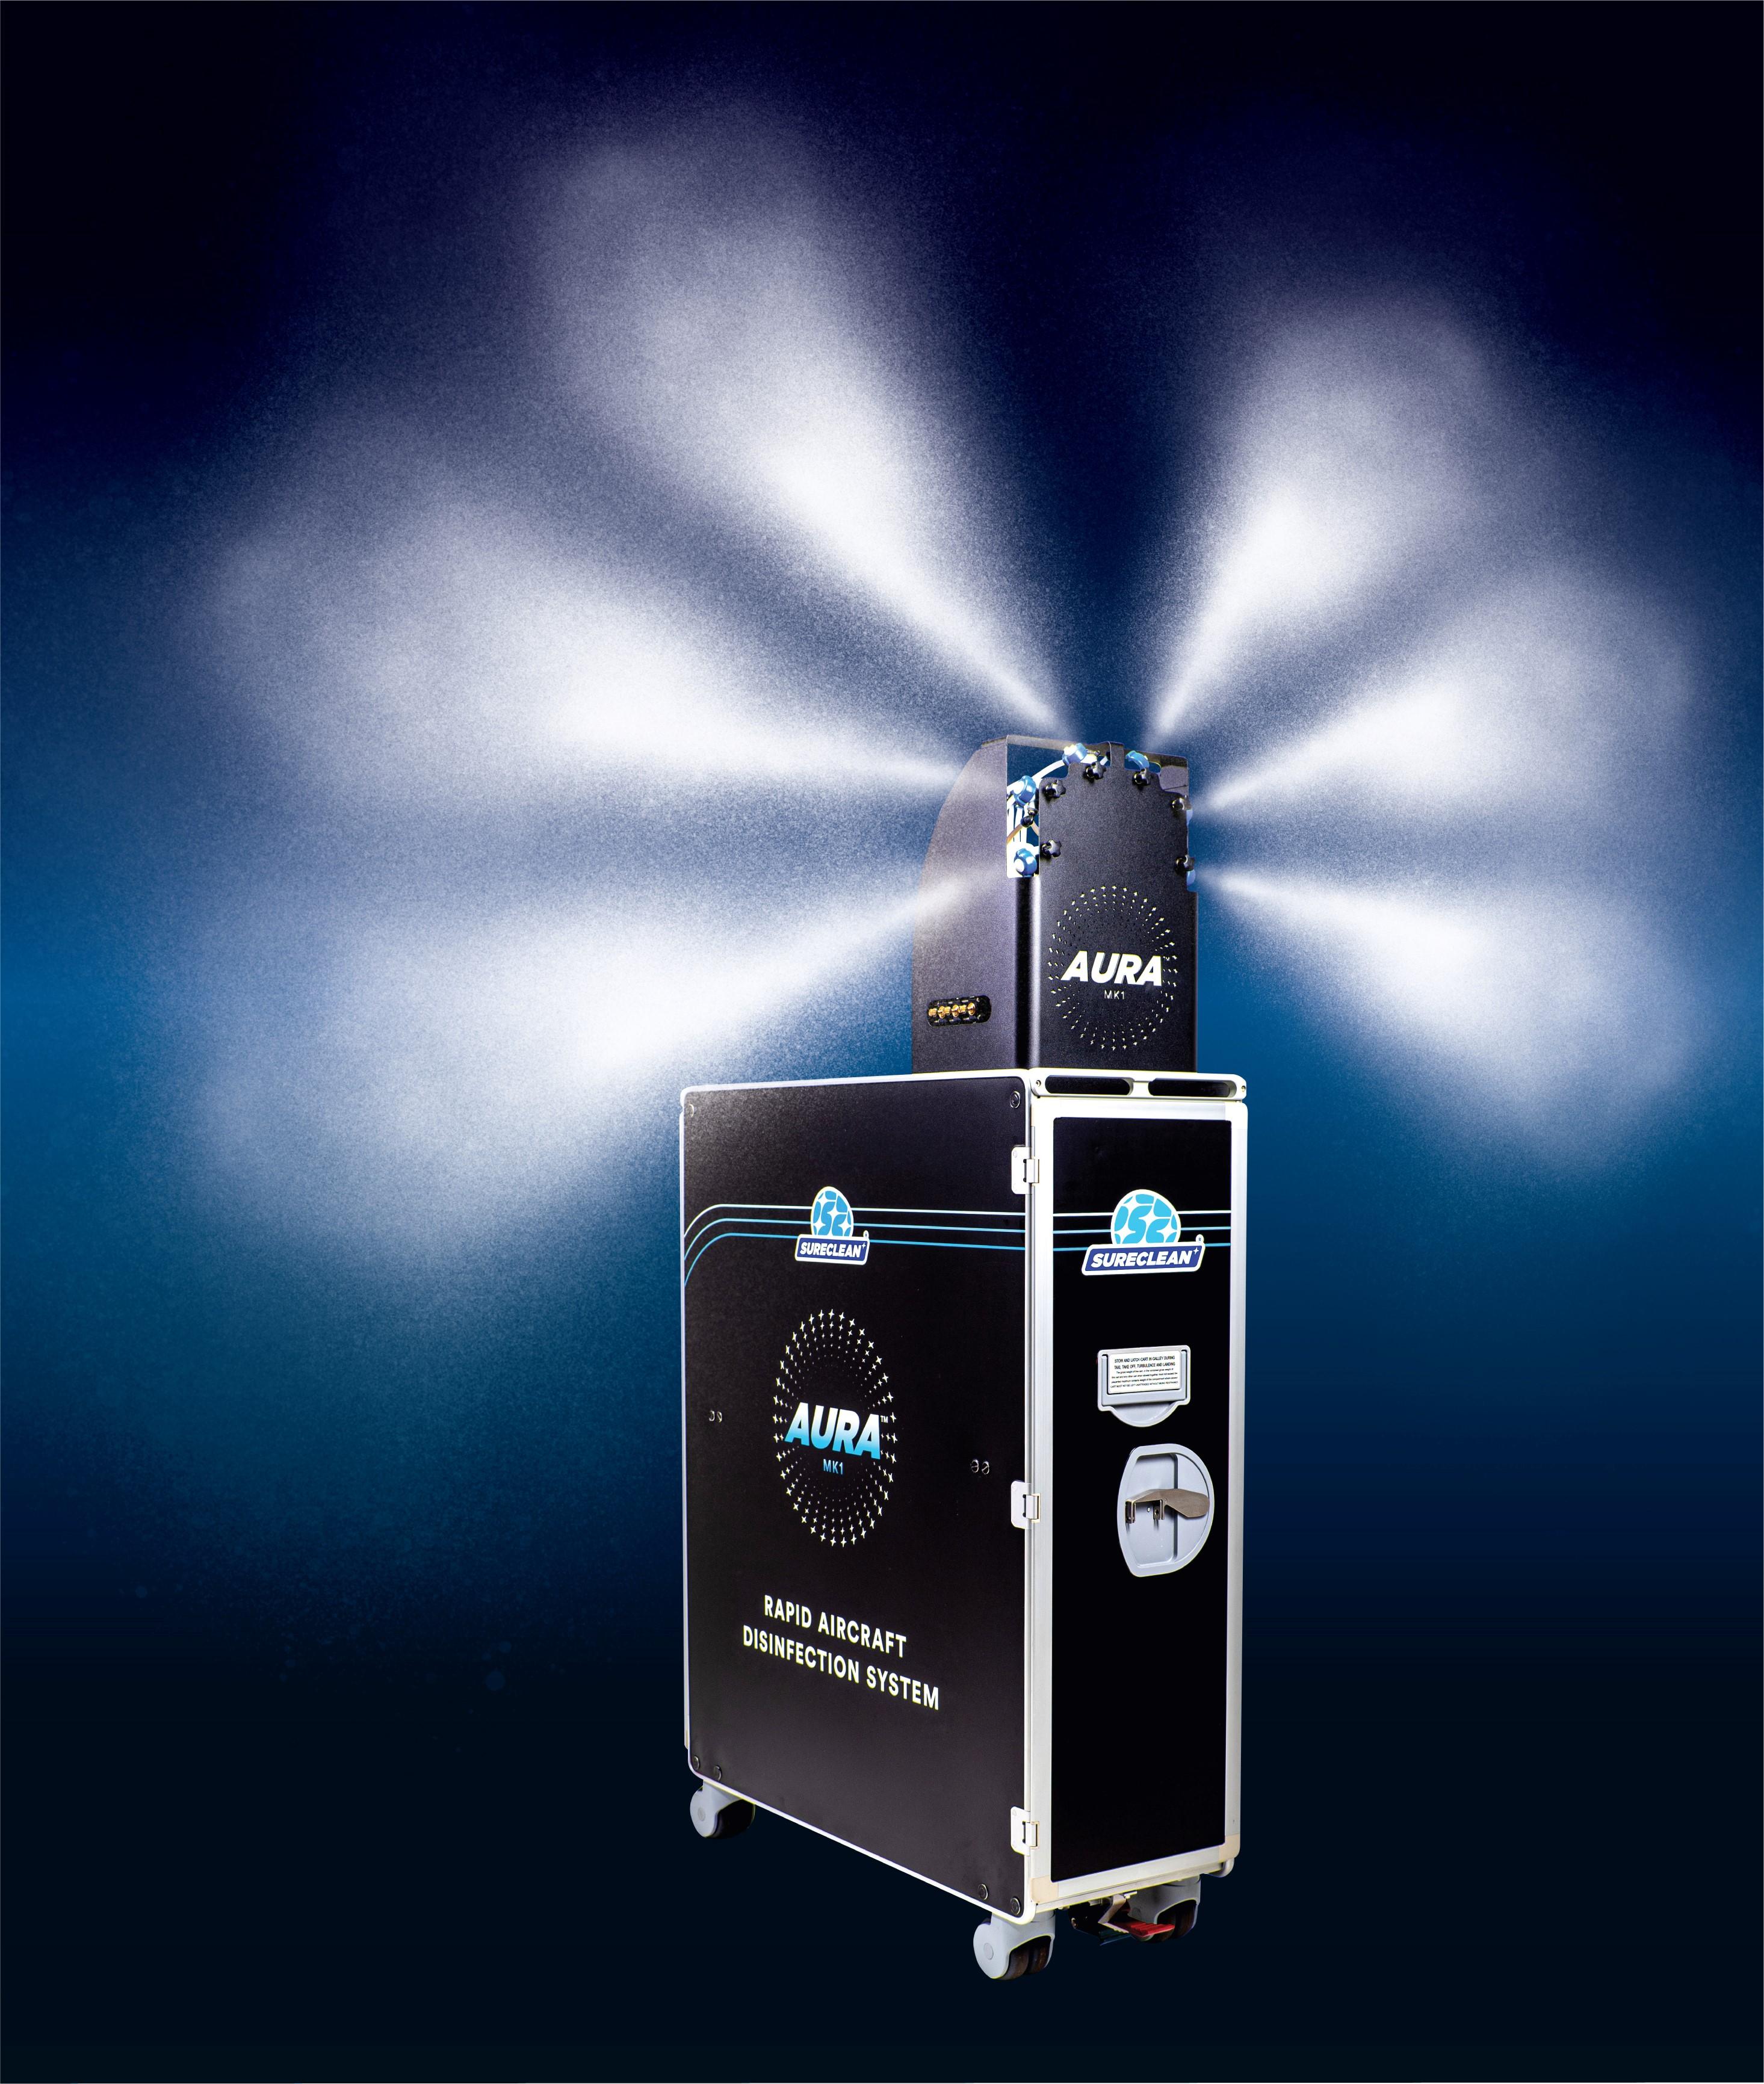 AURA Rapid Aircraft Disinfection System